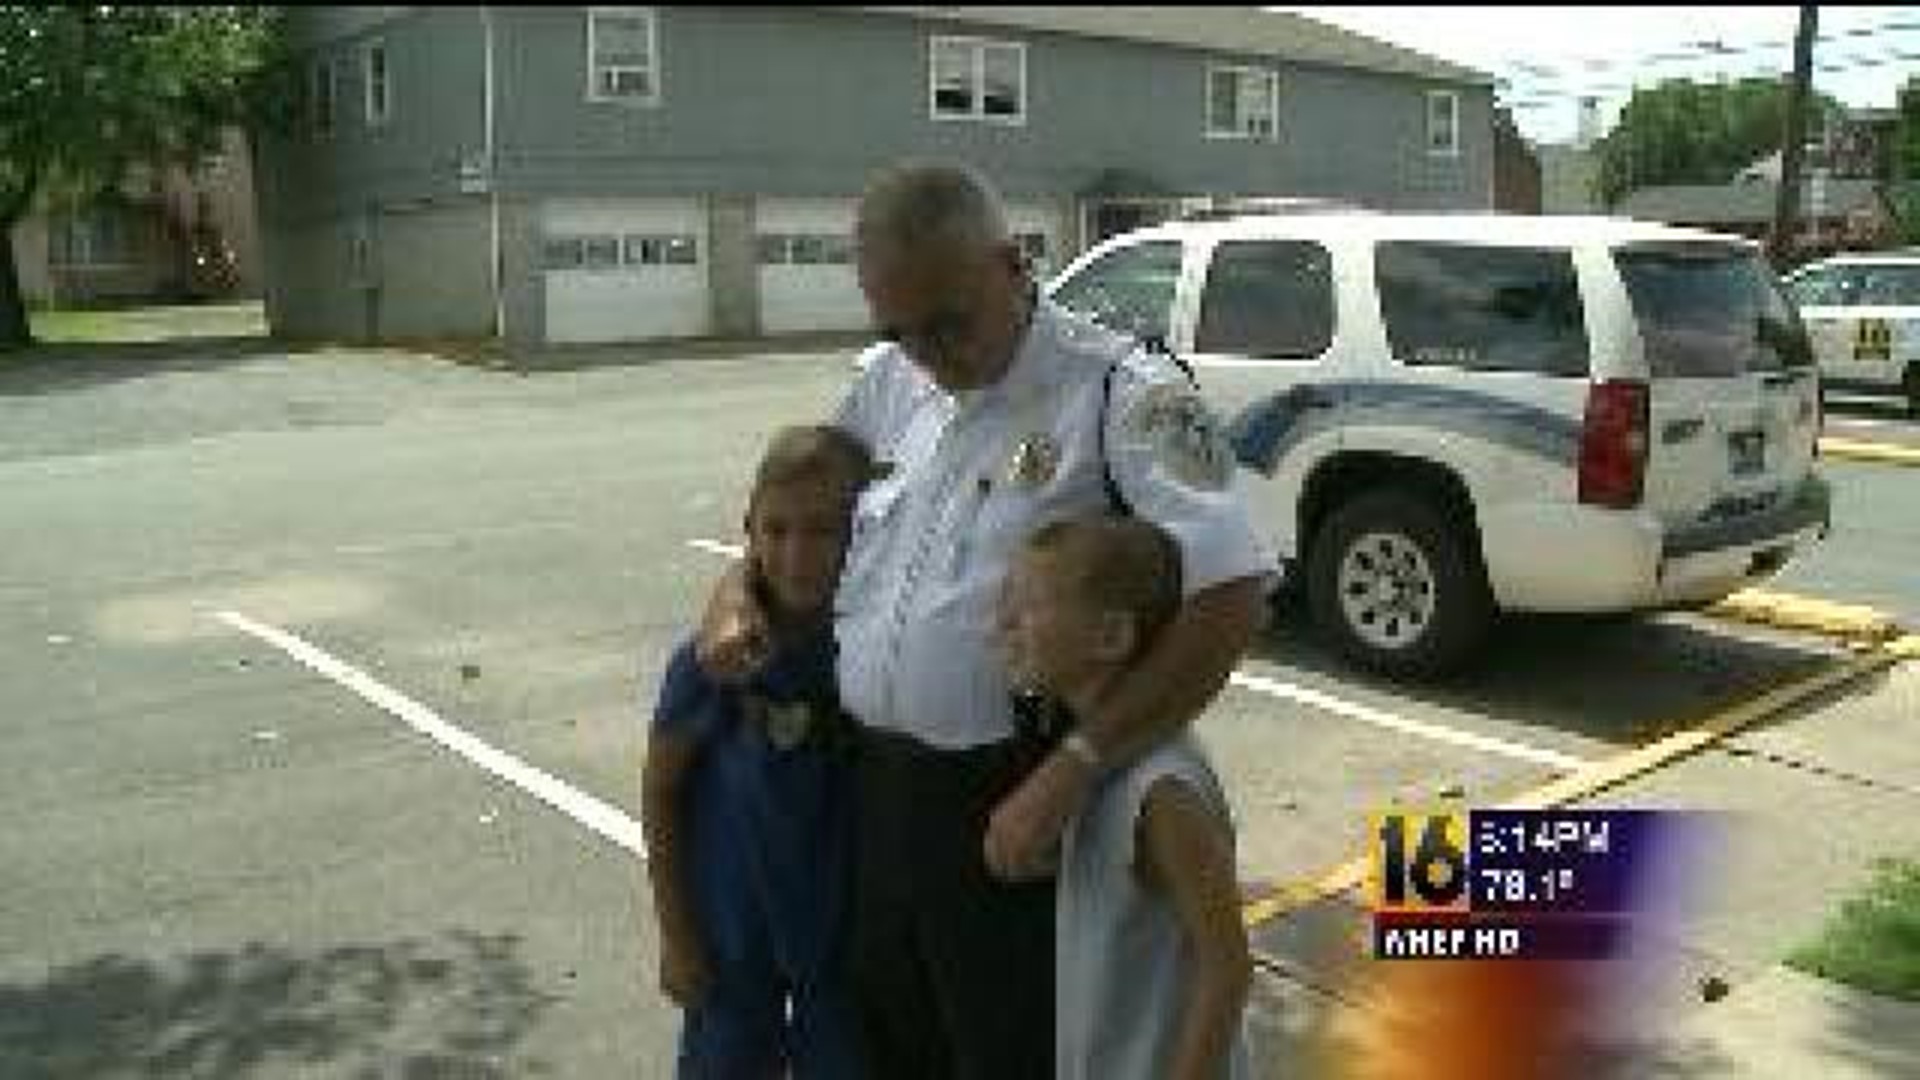 Muncy Police Chief Retires After Nearly 40 Years